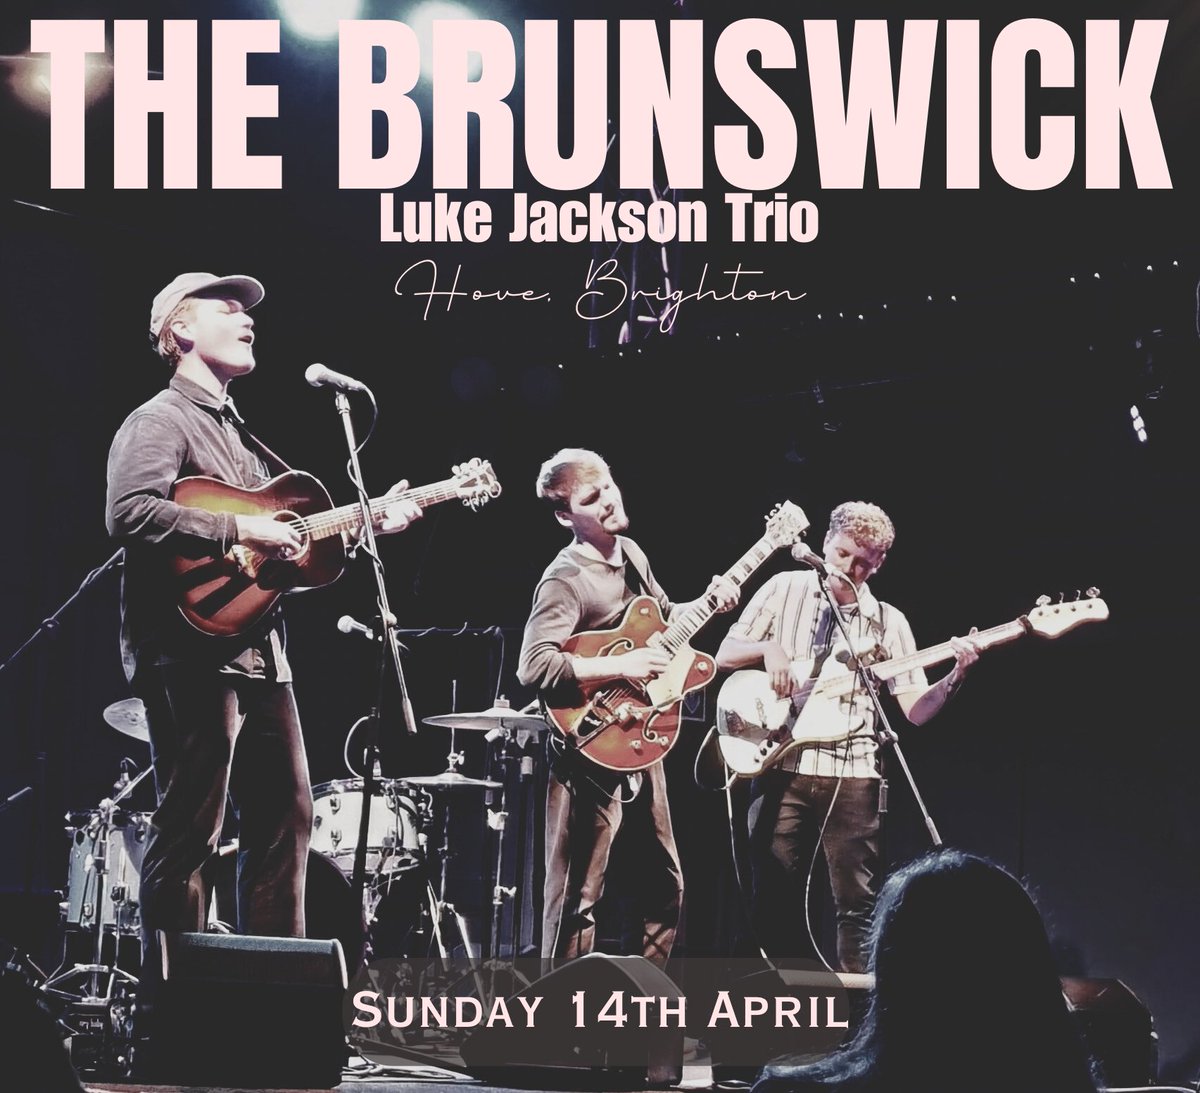 Already 30% of tickets have gone for our show in Hove, Brighton @Brunswickpub on Sunday 14th April! GRAB YOURS NOW: wegottickets.com/event/605384/#…